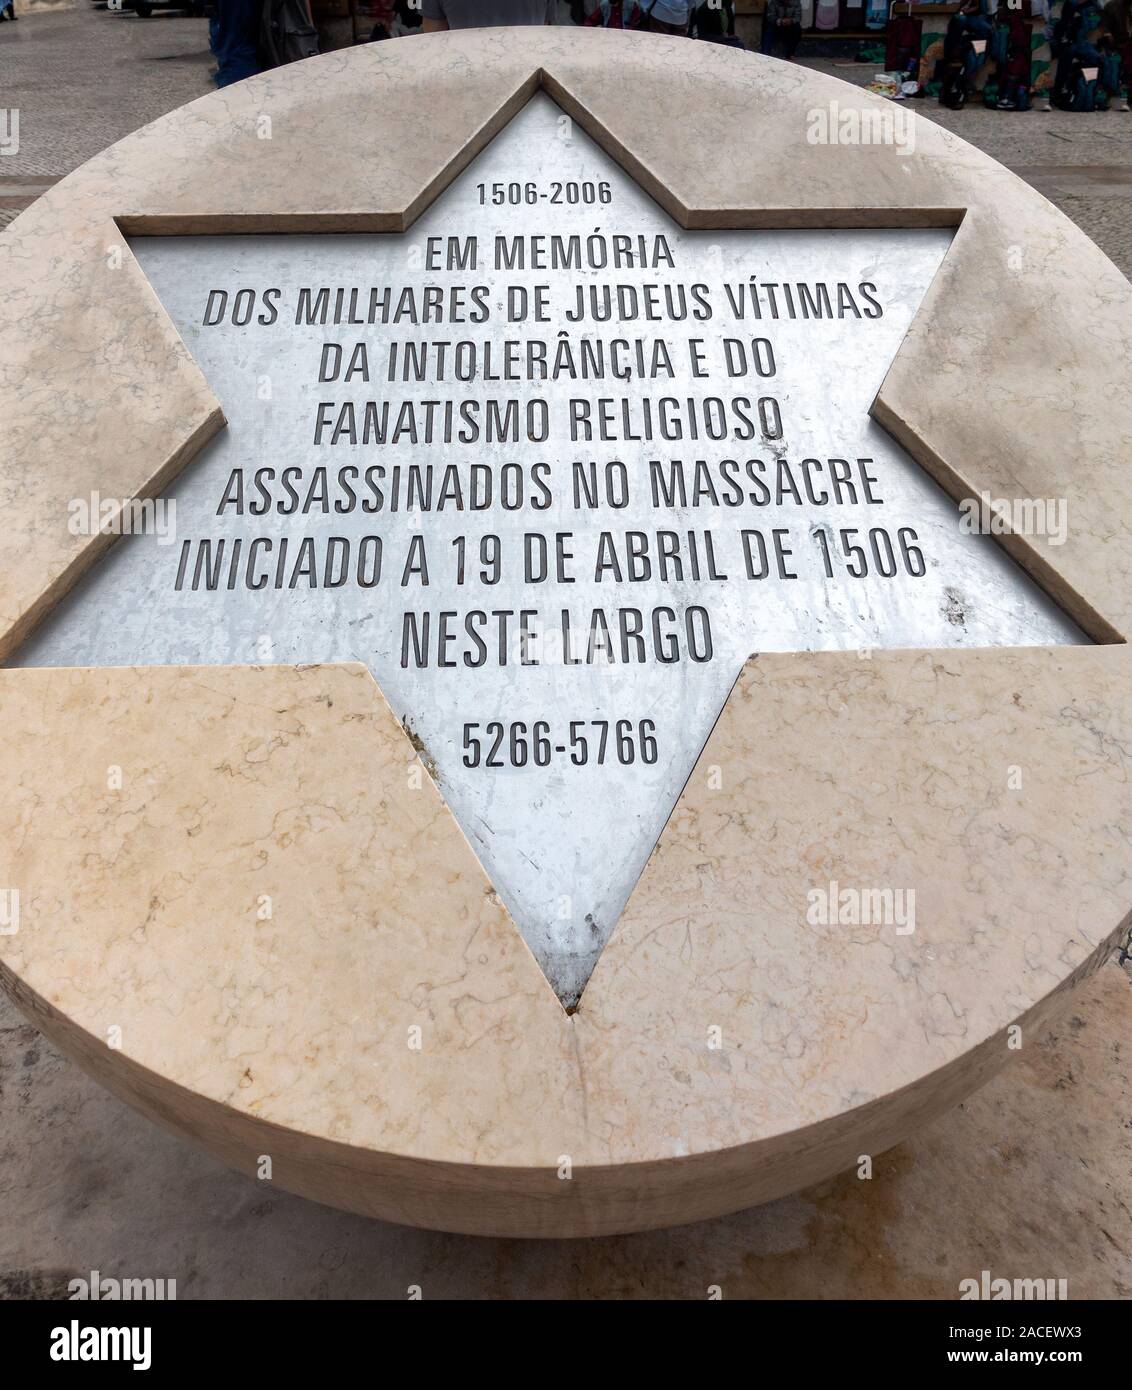 Monument To The Lisbon Massacre Of Jewish Citizens In 1506 Known As The Lisbon Pogrom Stock Photo